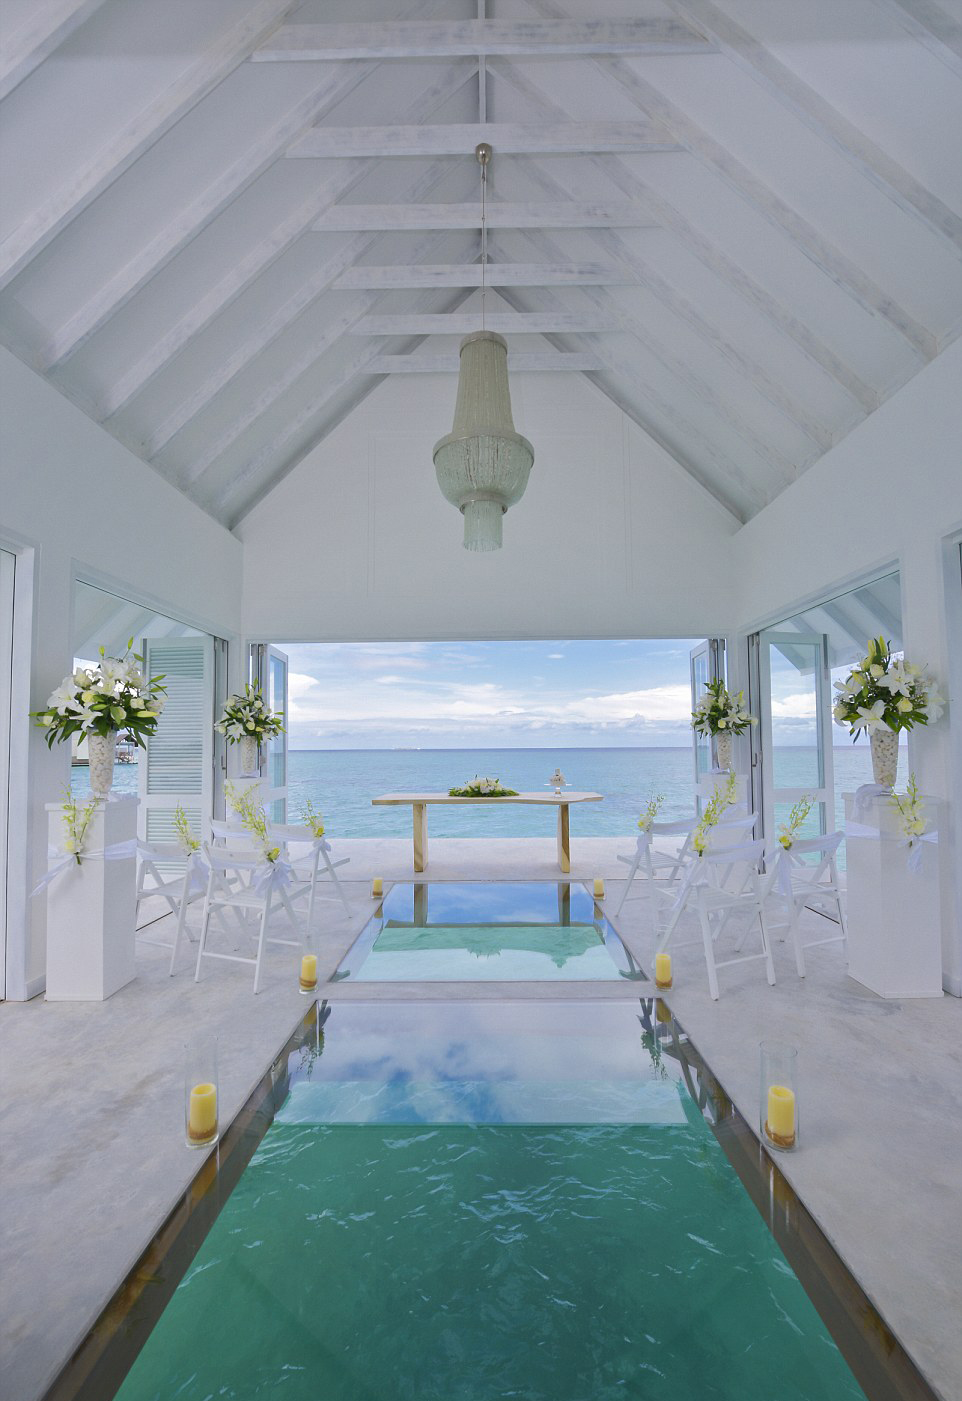 The structure can be decorated according to each couples personal style. Image: Four Seasons via Daily Mail